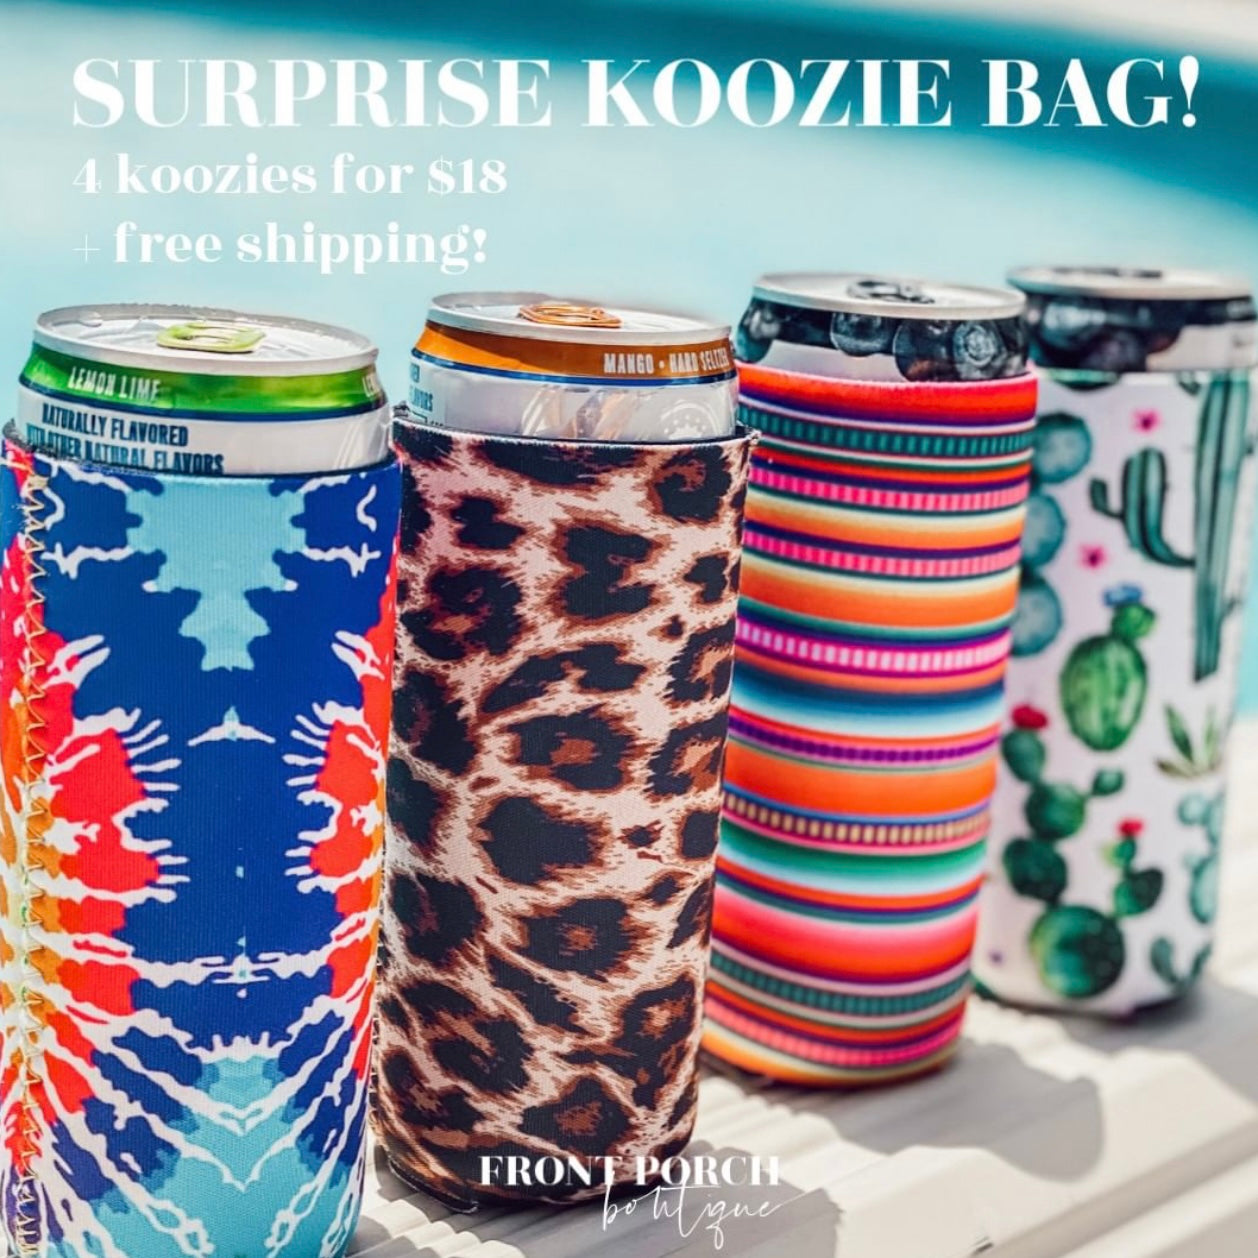 Coozie Surprise Bag